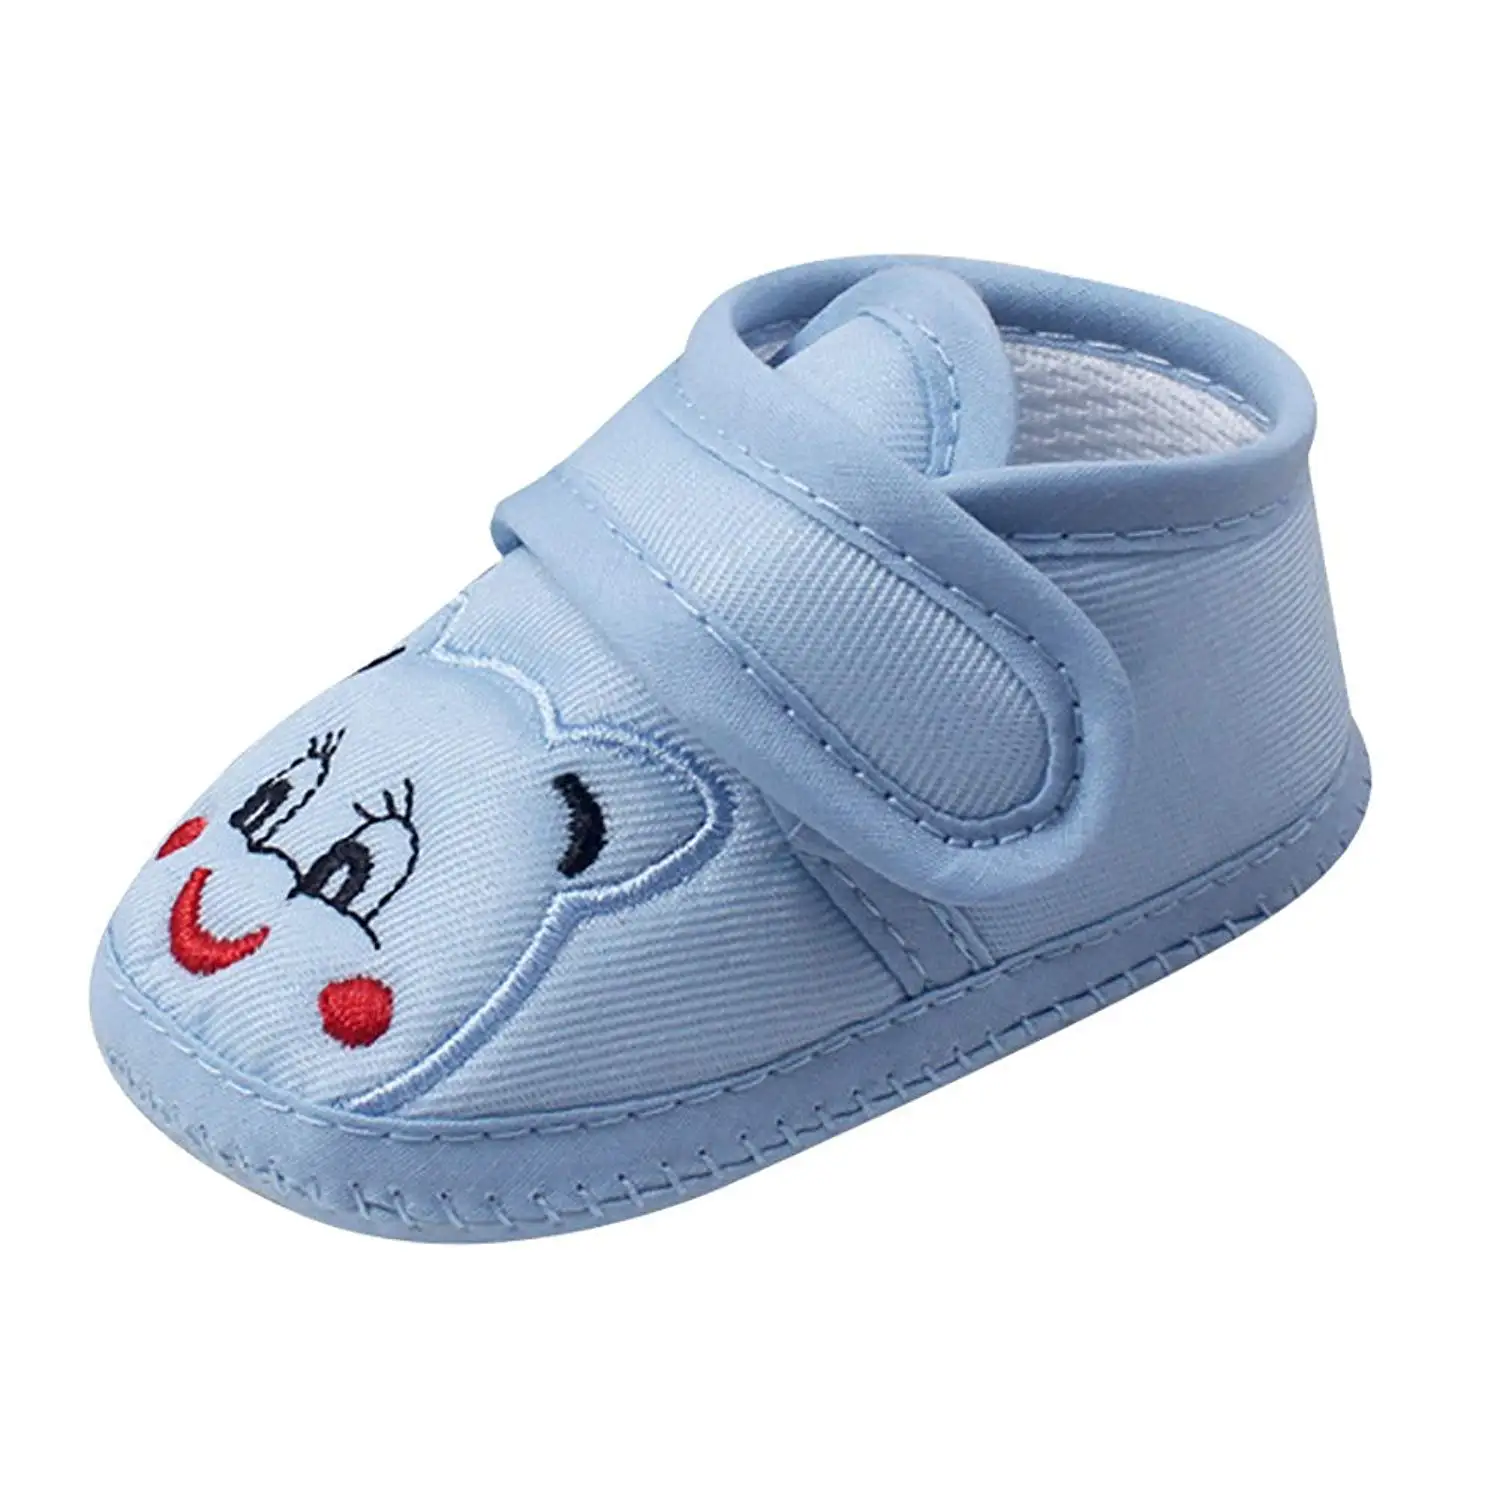 shoe size for 18 month old boy